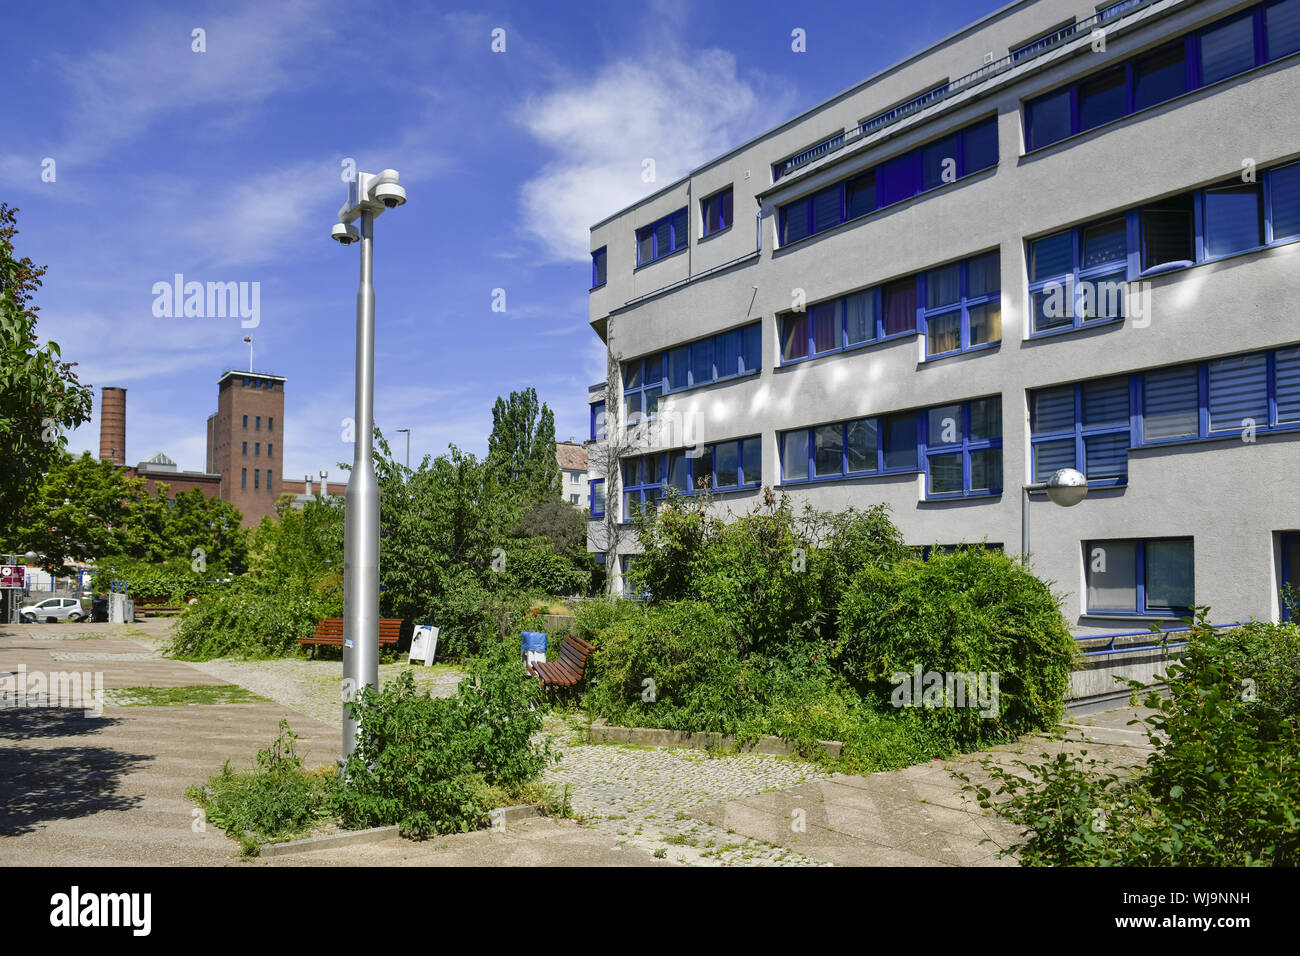 View, architecture, Outside, Outside, outside view, outside view, Berlin, concrete, Germany, building, building, house, real estate, real estate, dist Stock Photo